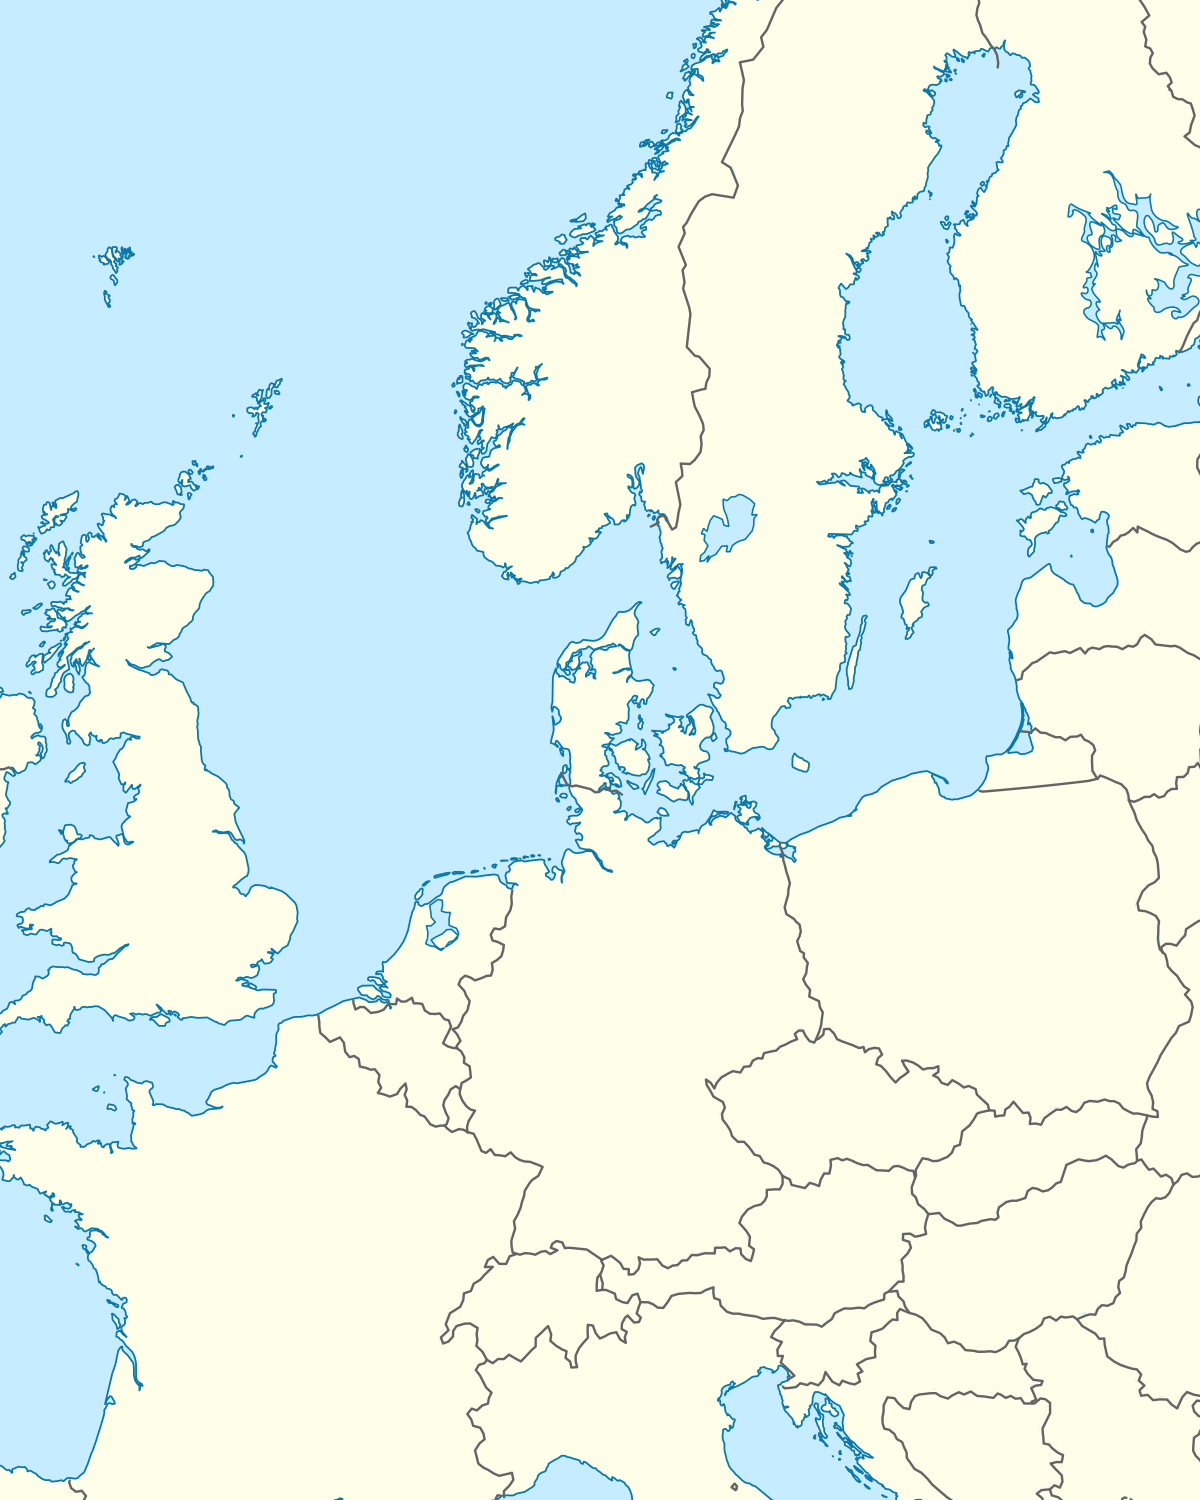 Barend/sandbox is located in Northern and Central Europe